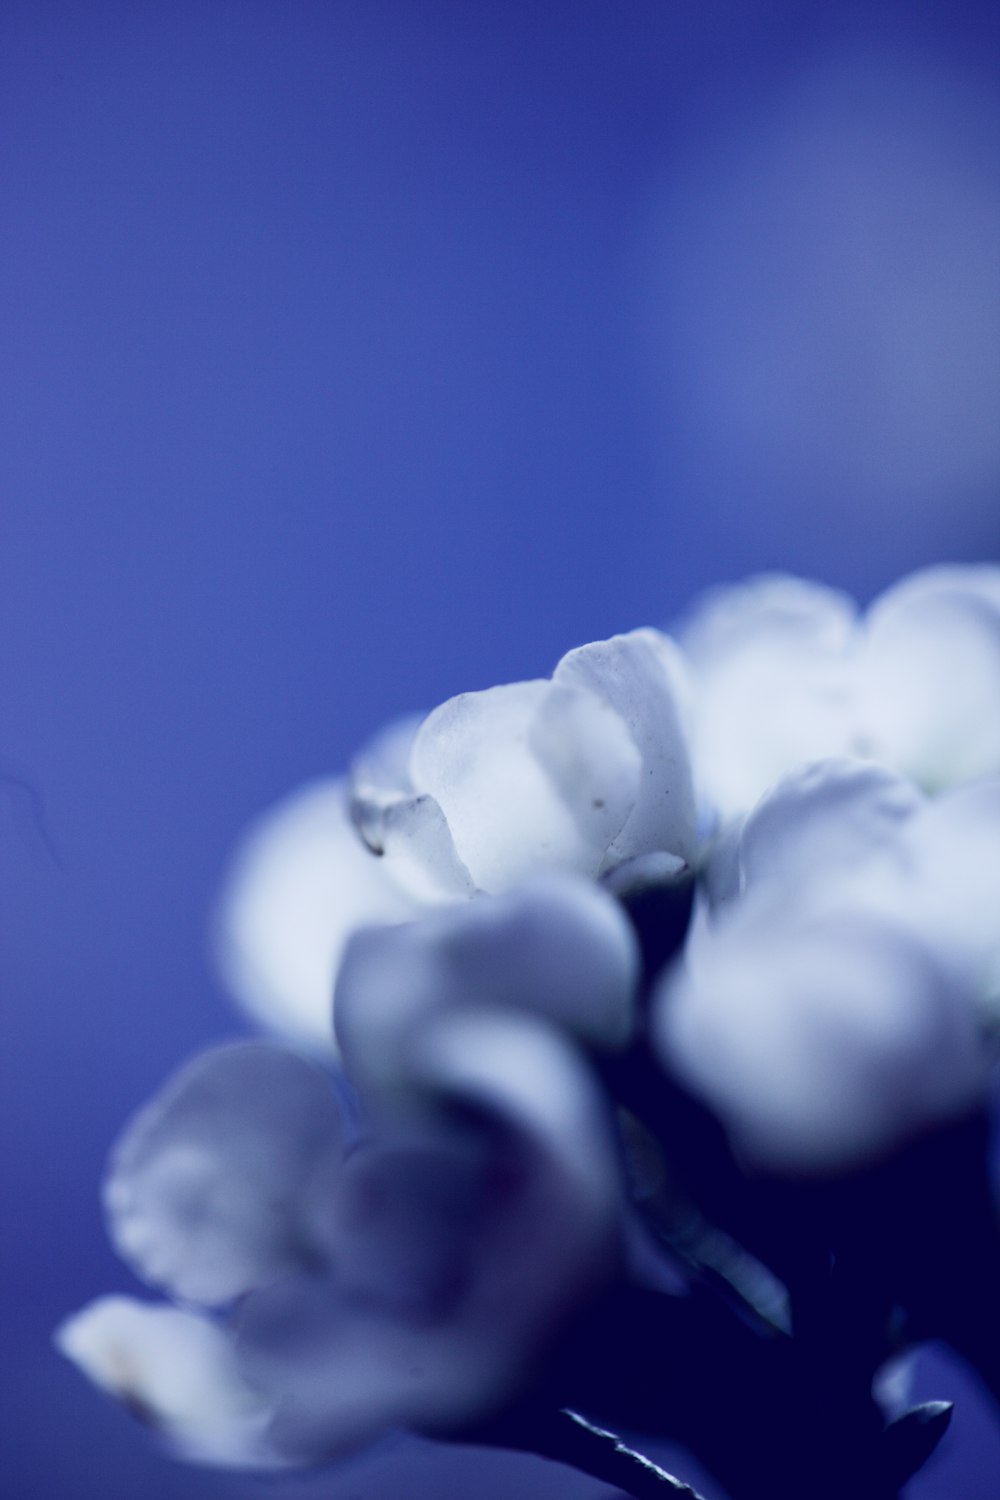 selective focus photography of white petal flower